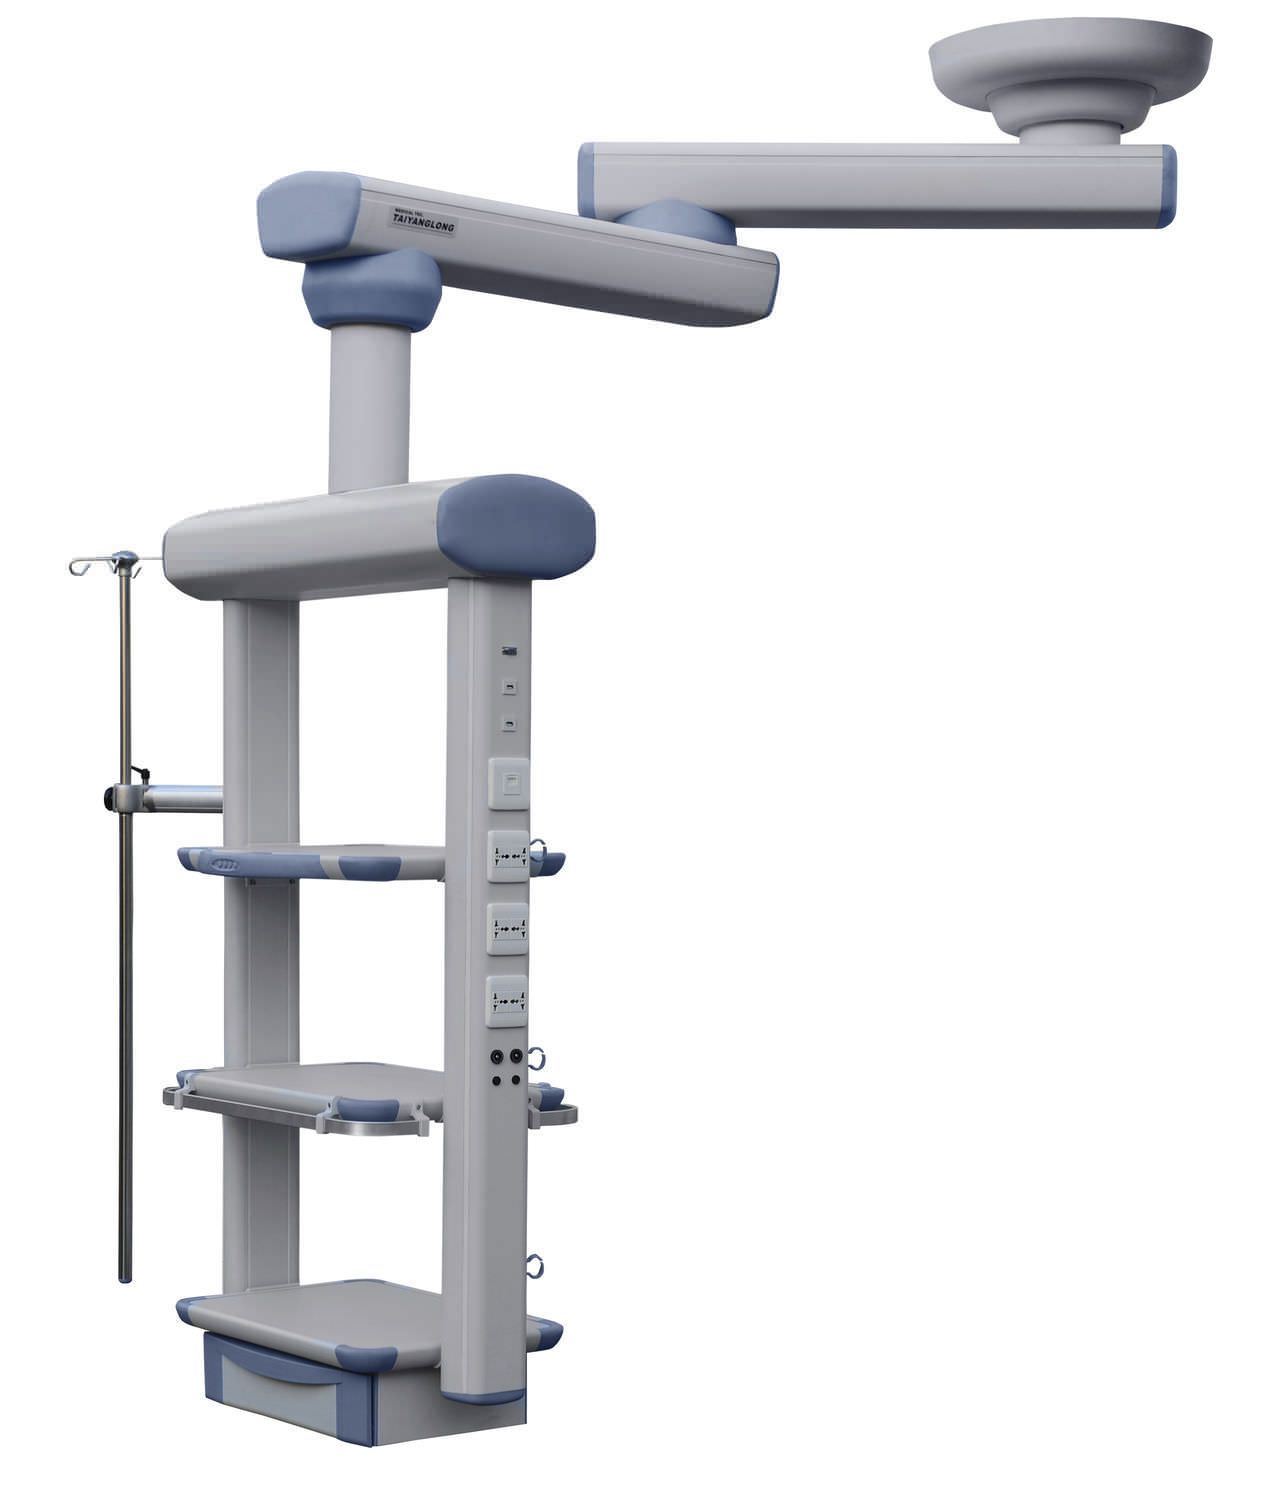 Ceiling-mounted medical pendant / articulated / double-arm / with shelves YDT-IDT-1 Hunan taiyanglong medical